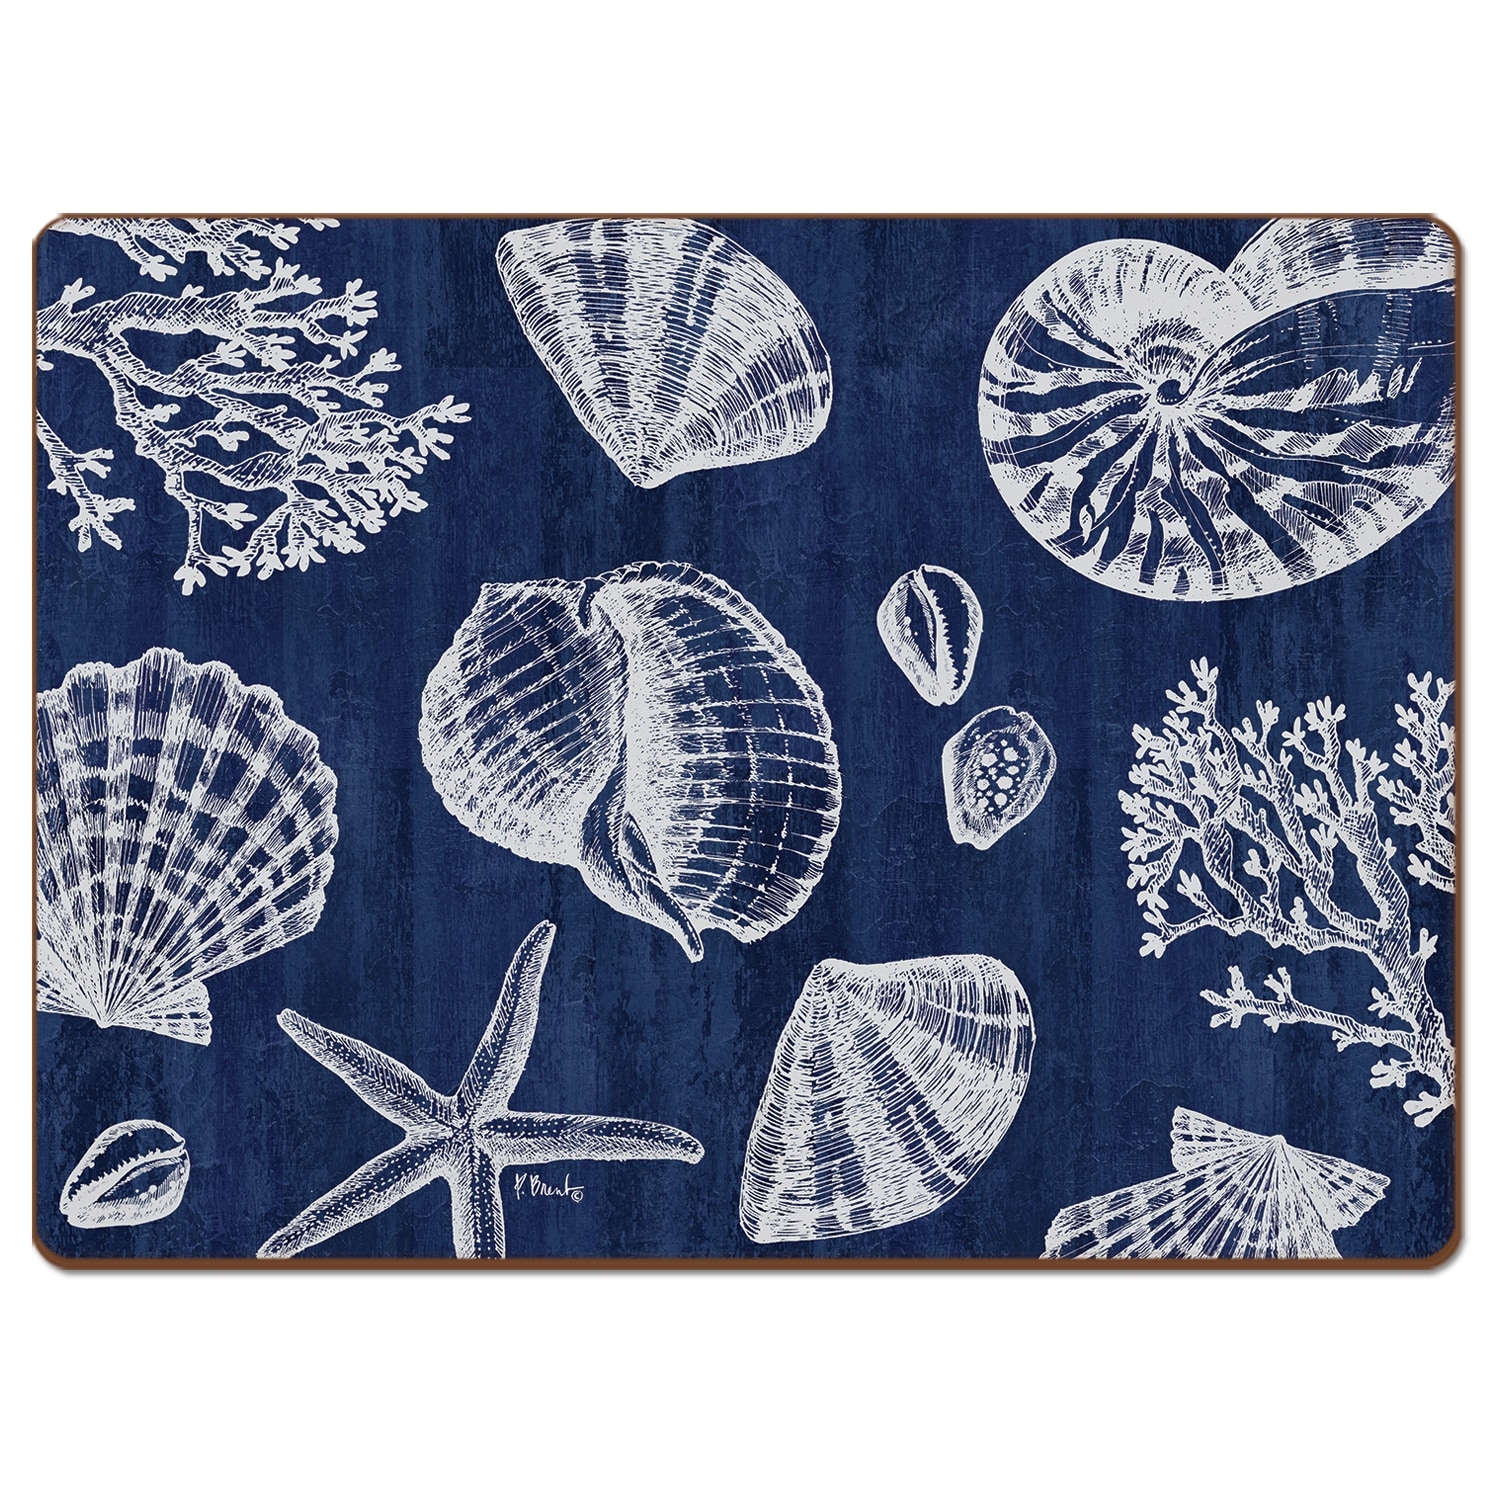 SEASHELL TAPESTRY REVERSIBLE PLACEMAT 